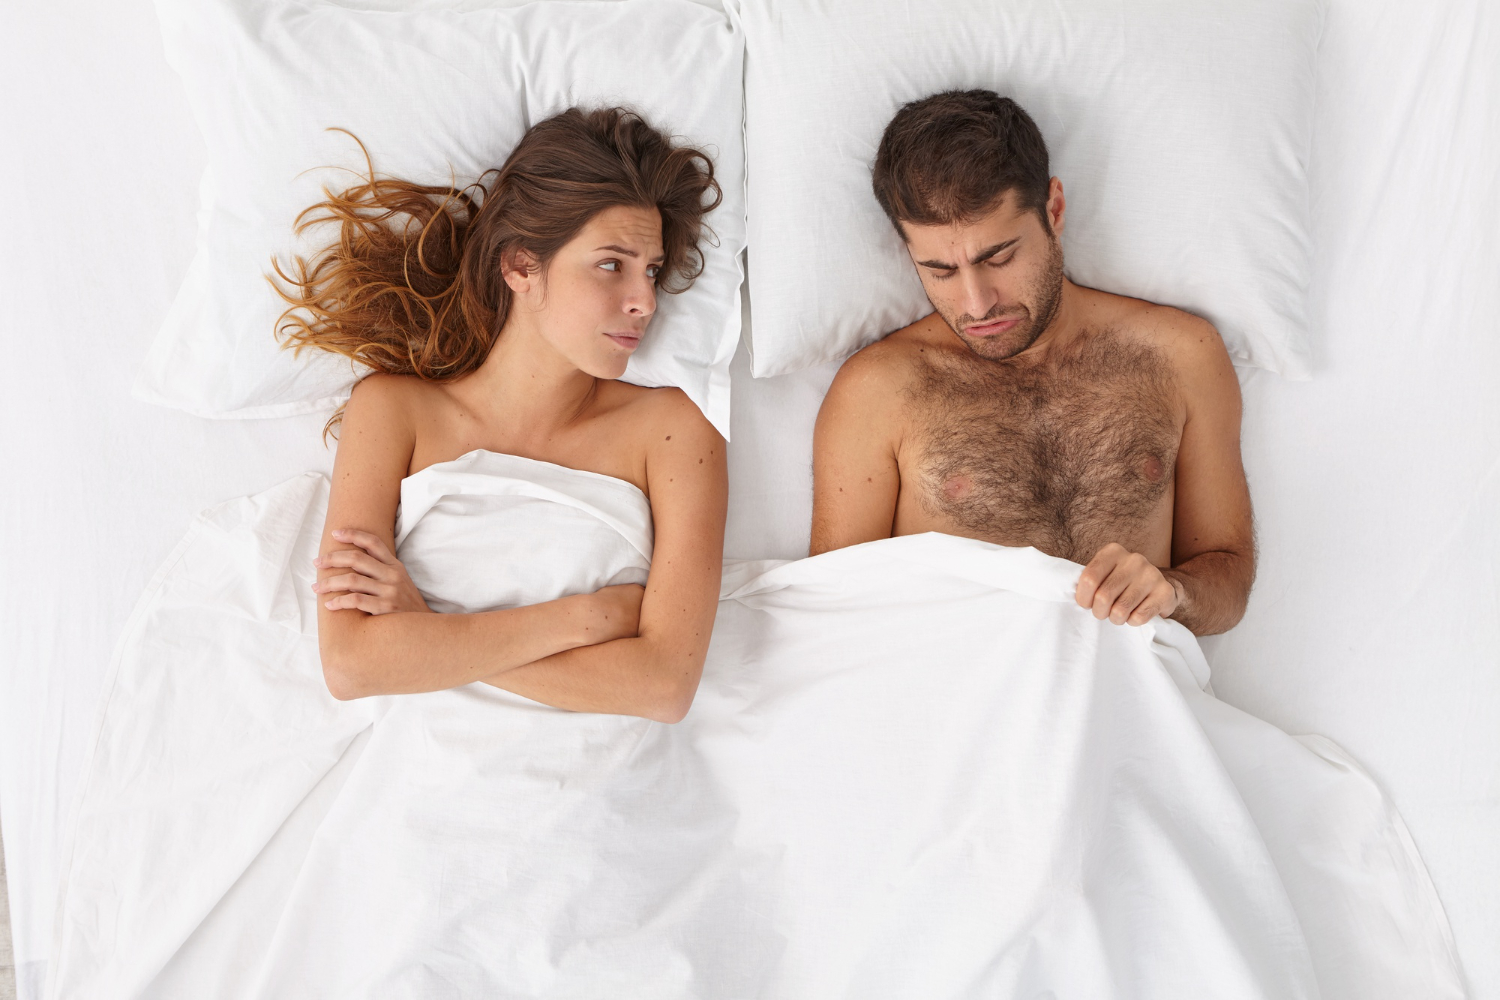 A couple on the bed while the man has an erectile dysfunction problem